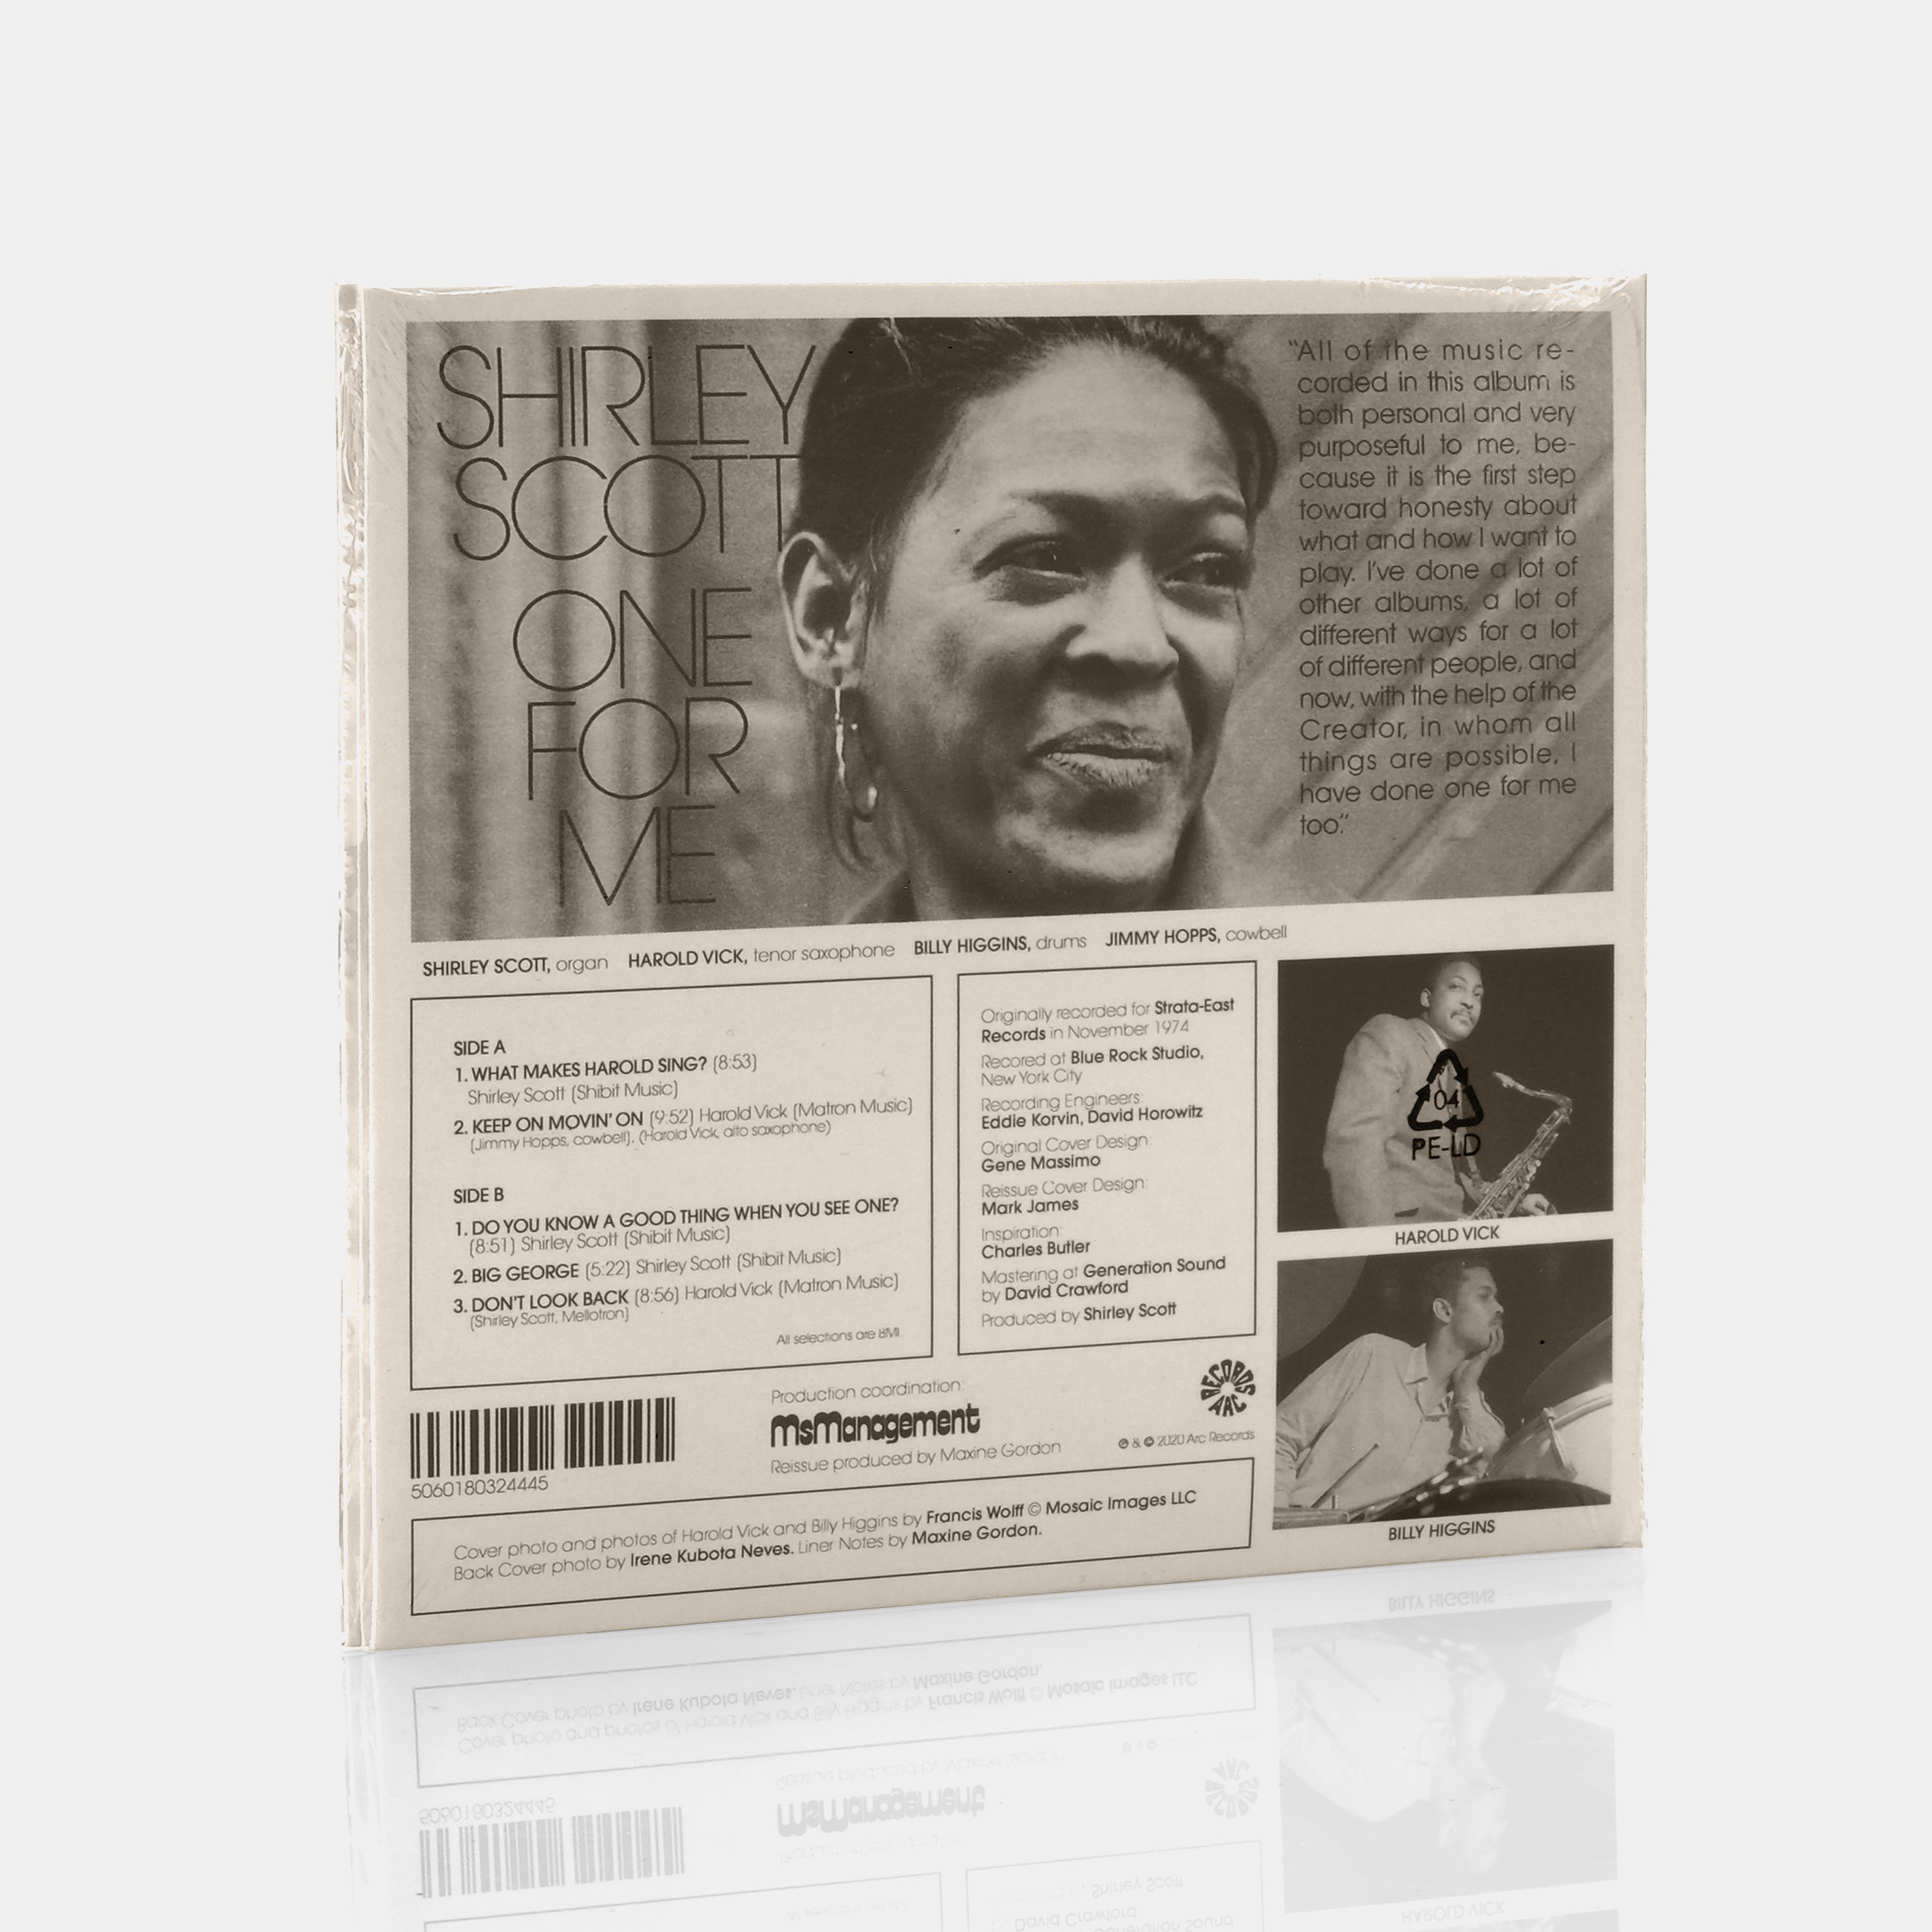 Shirley Scott - One For Me CD